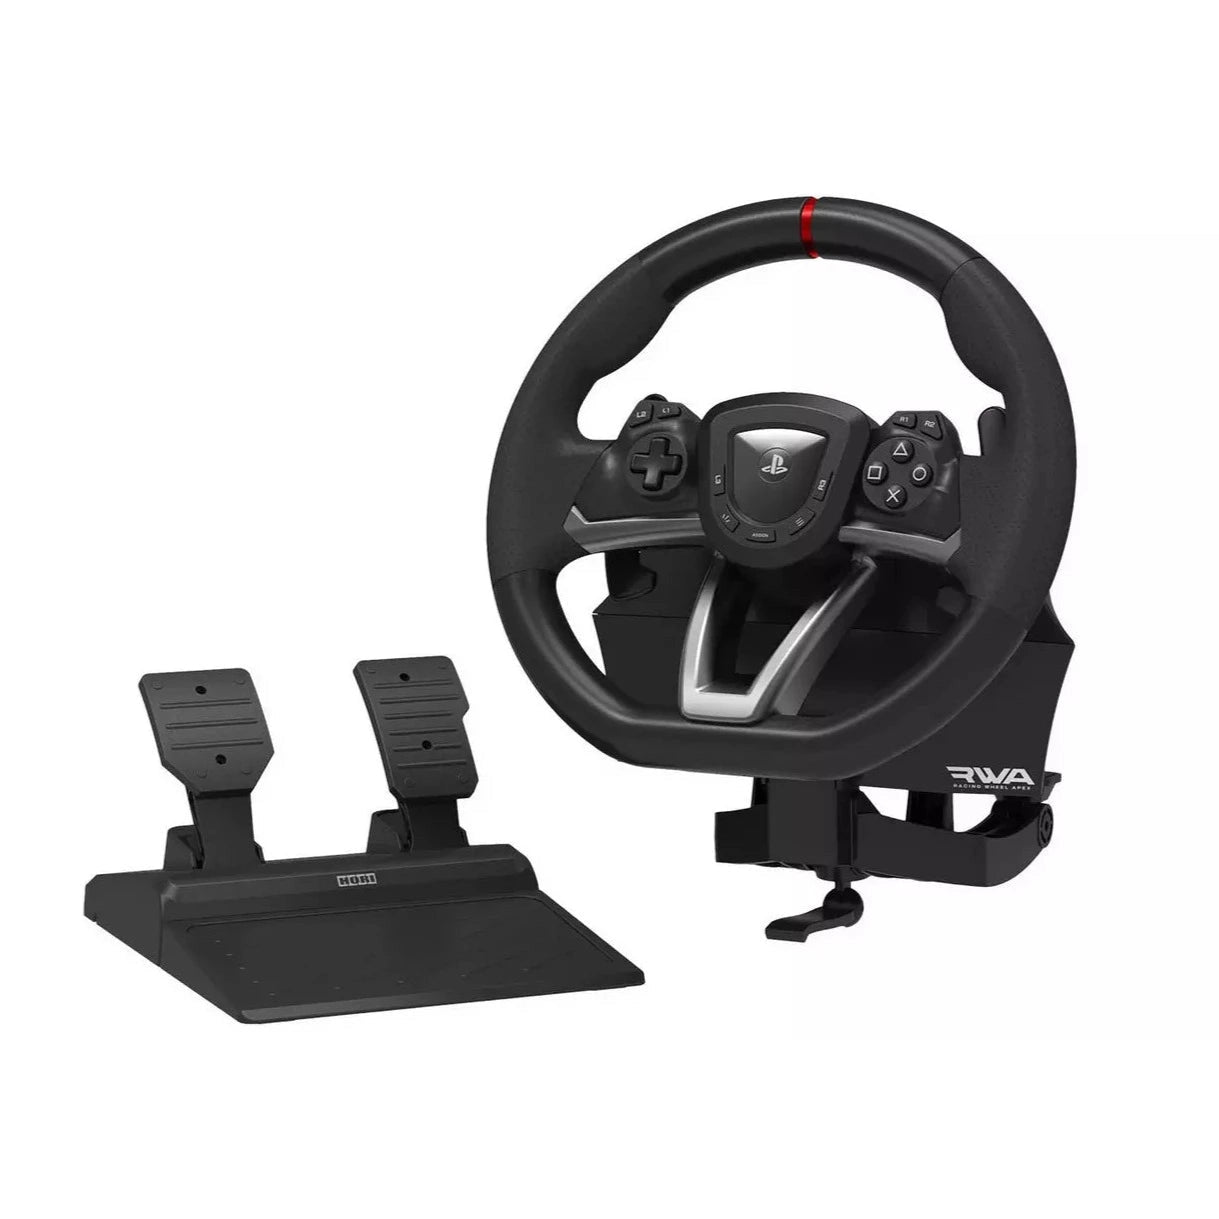 Hori Apex Steering Wheel and Pedals for PS5, PS4 & PC (SPF-004U) - Refurbished Pristine